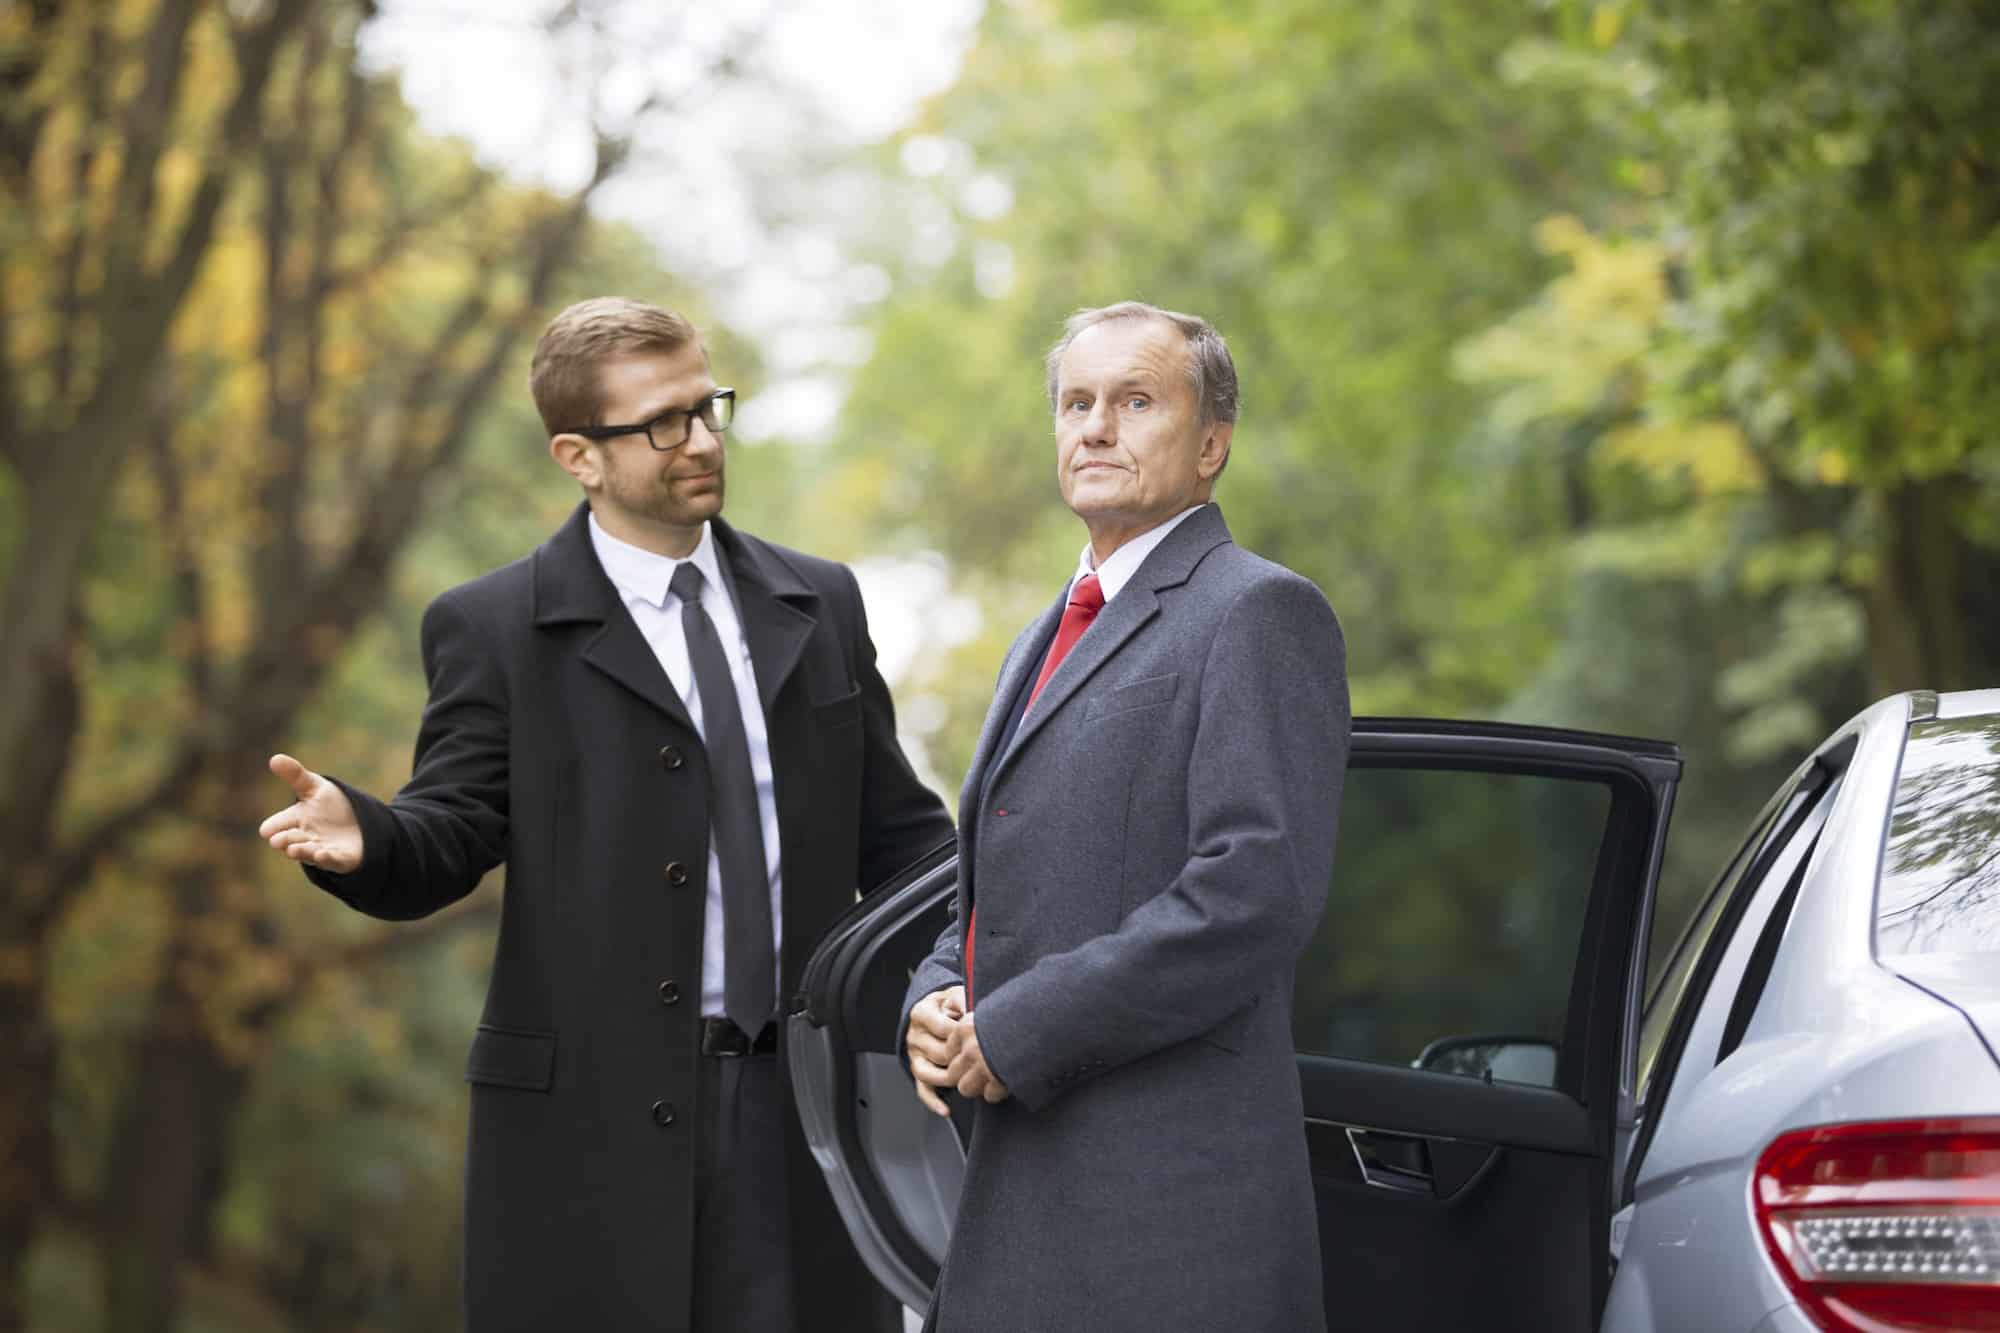 Chauffeur opening car door for businessman getting out